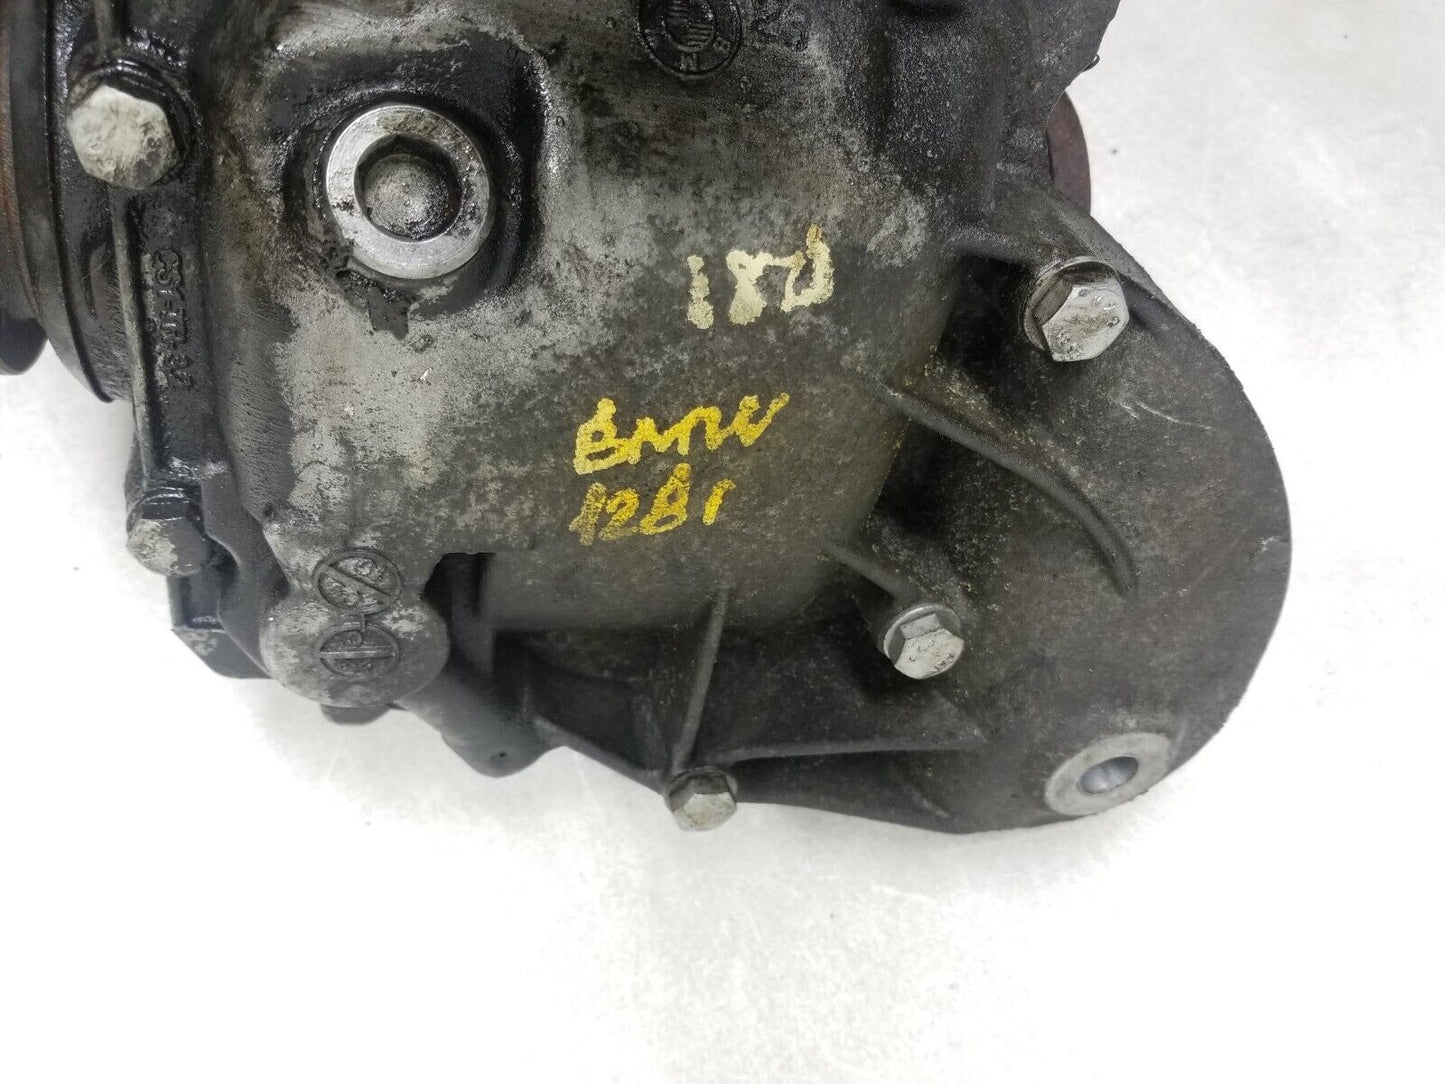 08 09 10 11 12 13 BMW 128i Rear Differential Carrier 3.73 Ratio OEM